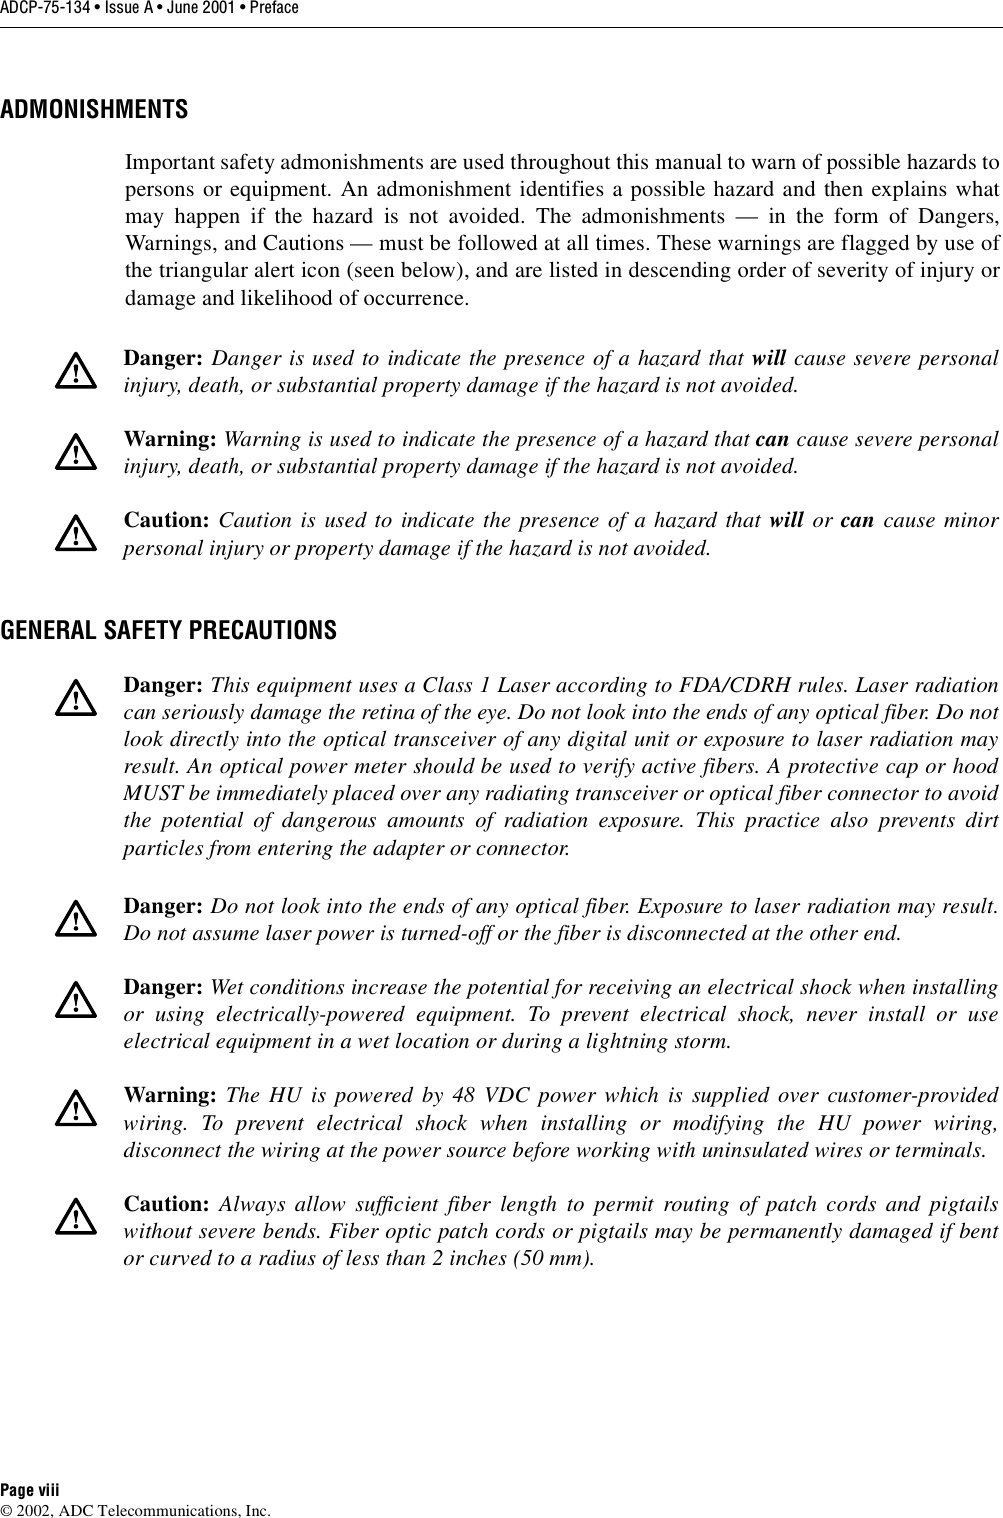 ADCP-75-134 • Issue A • June 2001 • PrefacePage viii©2002, ADC Telecommunications, Inc.ADMONISHMENTSImportant safety admonishments are used throughout this manual to warn of possible hazards topersons or equipment. An admonishment identifies apossible hazard and then explains whatmay happen if the hazard is not avoided. The admonishments —in the form of Dangers,Warnings, and Cautions —must be followed at all times. These warnings are flagged by use ofthe triangular alert icon (seen below), and are listed in descending order of severity of injury ordamage and likelihood of occurrence.GENERAL SAFETY PRECAUTIONSDanger: Danger is used to indicate the presence of ahazard that will cause severe personalinjury, death, or substantial property damage if the hazard is not avoided.Warning: Warning is used to indicate the presence of ahazard that can cause severe personalinjury, death, or substantial property damage if the hazard is not avoided.Caution: Caution is used to indicate the presence of ahazard that will or can cause minorpersonal injury or property damage if the hazard is not avoided.Danger: This equipment uses aClass 1Laser according to FDA/CDRH rules. Laser radiationcan seriously damage the retina of the eye. Do not look into the ends of any optical fiber. Do notlook directly into the optical transceiver of any digital unit or exposure to laser radiation mayresult. An optical power meter should be used to verify active fibers. Aprotective cap or hoodMUST be immediately placed over any radiating transceiver or optical fiber connector to avoidthe potential of dangerous amounts of radiation exposure. This practice also prevents dirtparticles from entering the adapter or connector.Danger: Do not look into the ends of any optical fiber. Exposure to laser radiation may result.Do not assume laser power is turned-off or the fiber is disconnected at the other end.Danger: Wet conditions increase the potential for receiving an electrical shock when installingor using electrically-powered equipment. To prevent electrical shock, never install or useelectrical equipment in awet location or during alightning storm.Warning: The HU is powered by 48 VDC power which is supplied over customer-providedwiring. To prevent electrical shock when installing or modifying the HU power wiring,disconnect the wiring at the power source before working with uninsulated wires or terminals.Caution: Always allow sufficient fiber length to permit routing of patch cords and pigtailswithout severe bends. Fiber optic patch cords or pigtails may be permanently damaged if bentor curved to aradius of less than 2inches (50 mm).